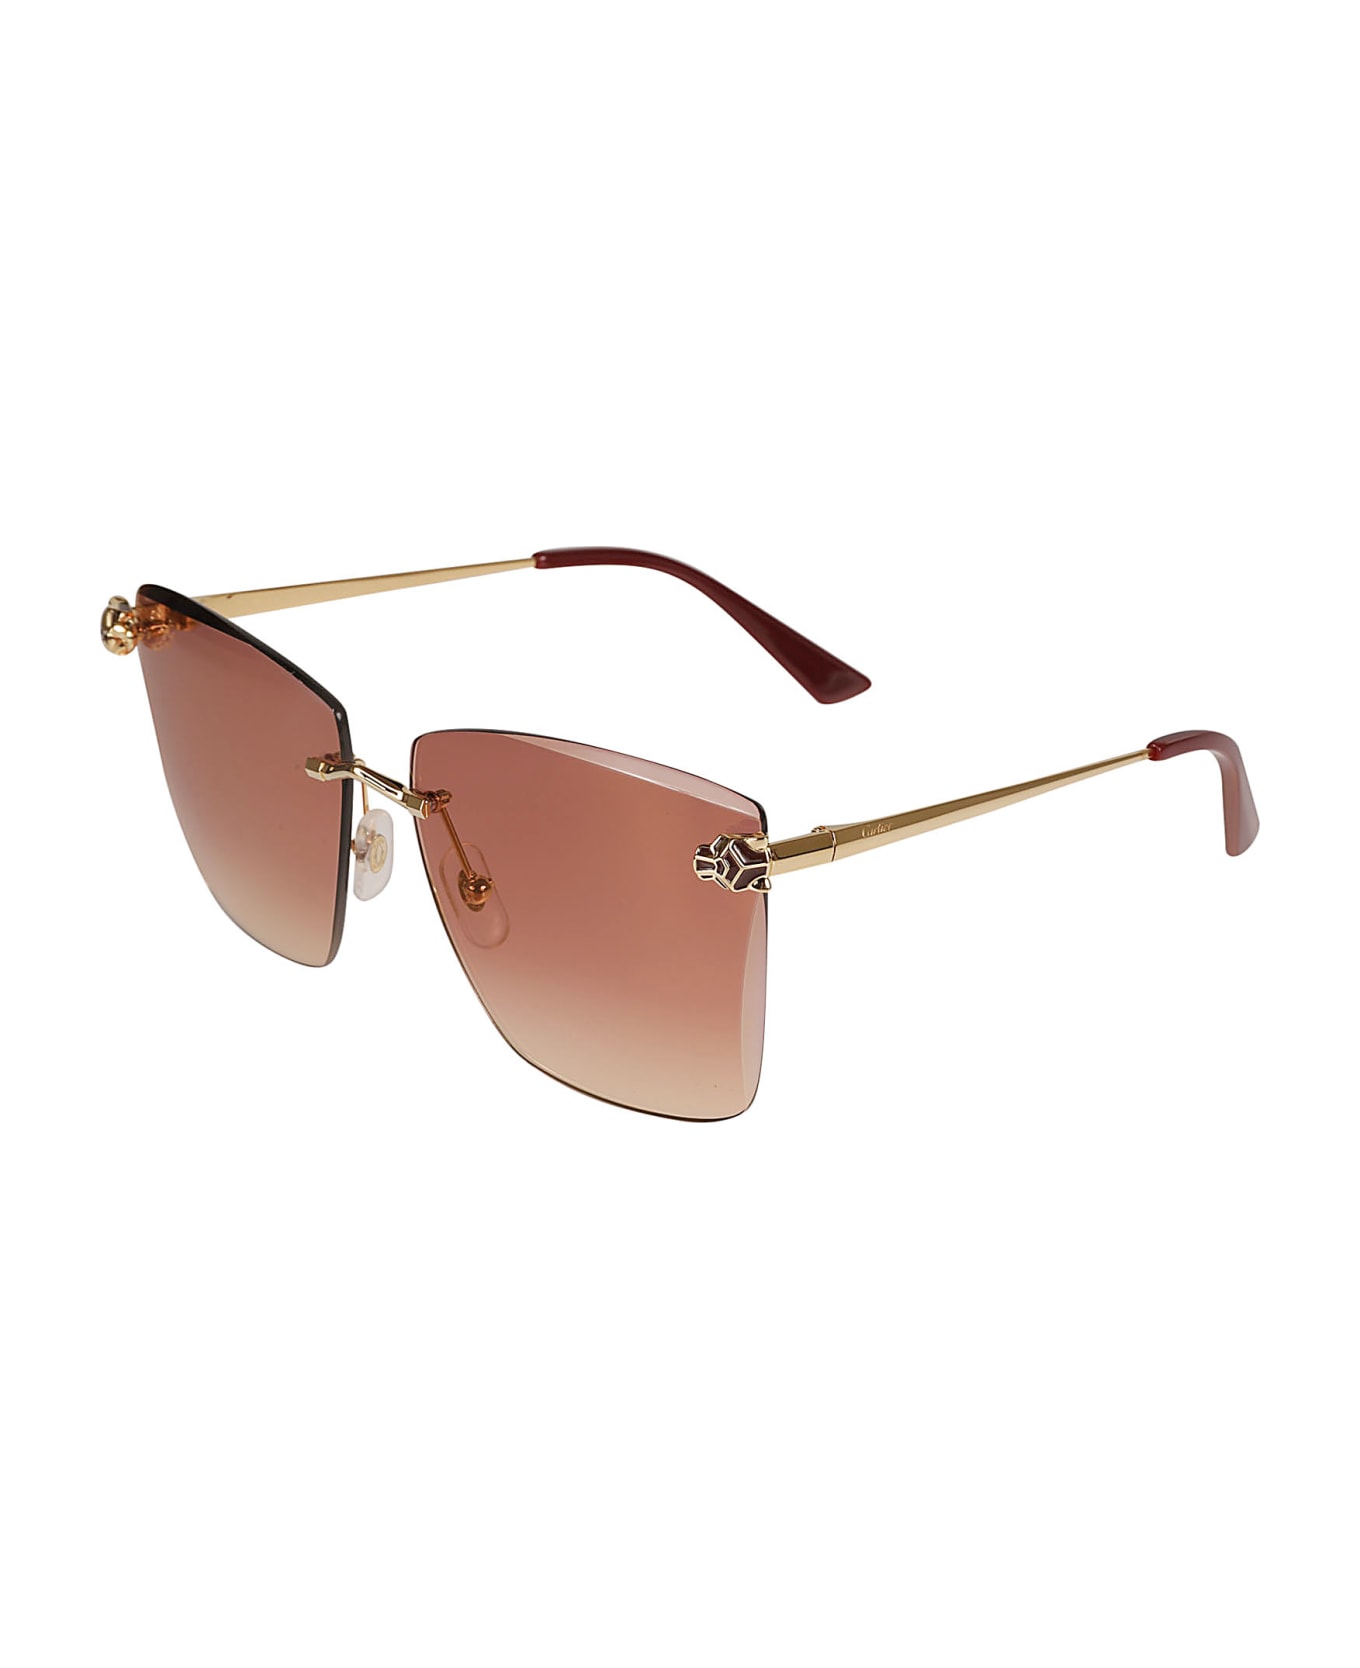 Cartier Eyewear Square Green Sunglasses - Gold/Red